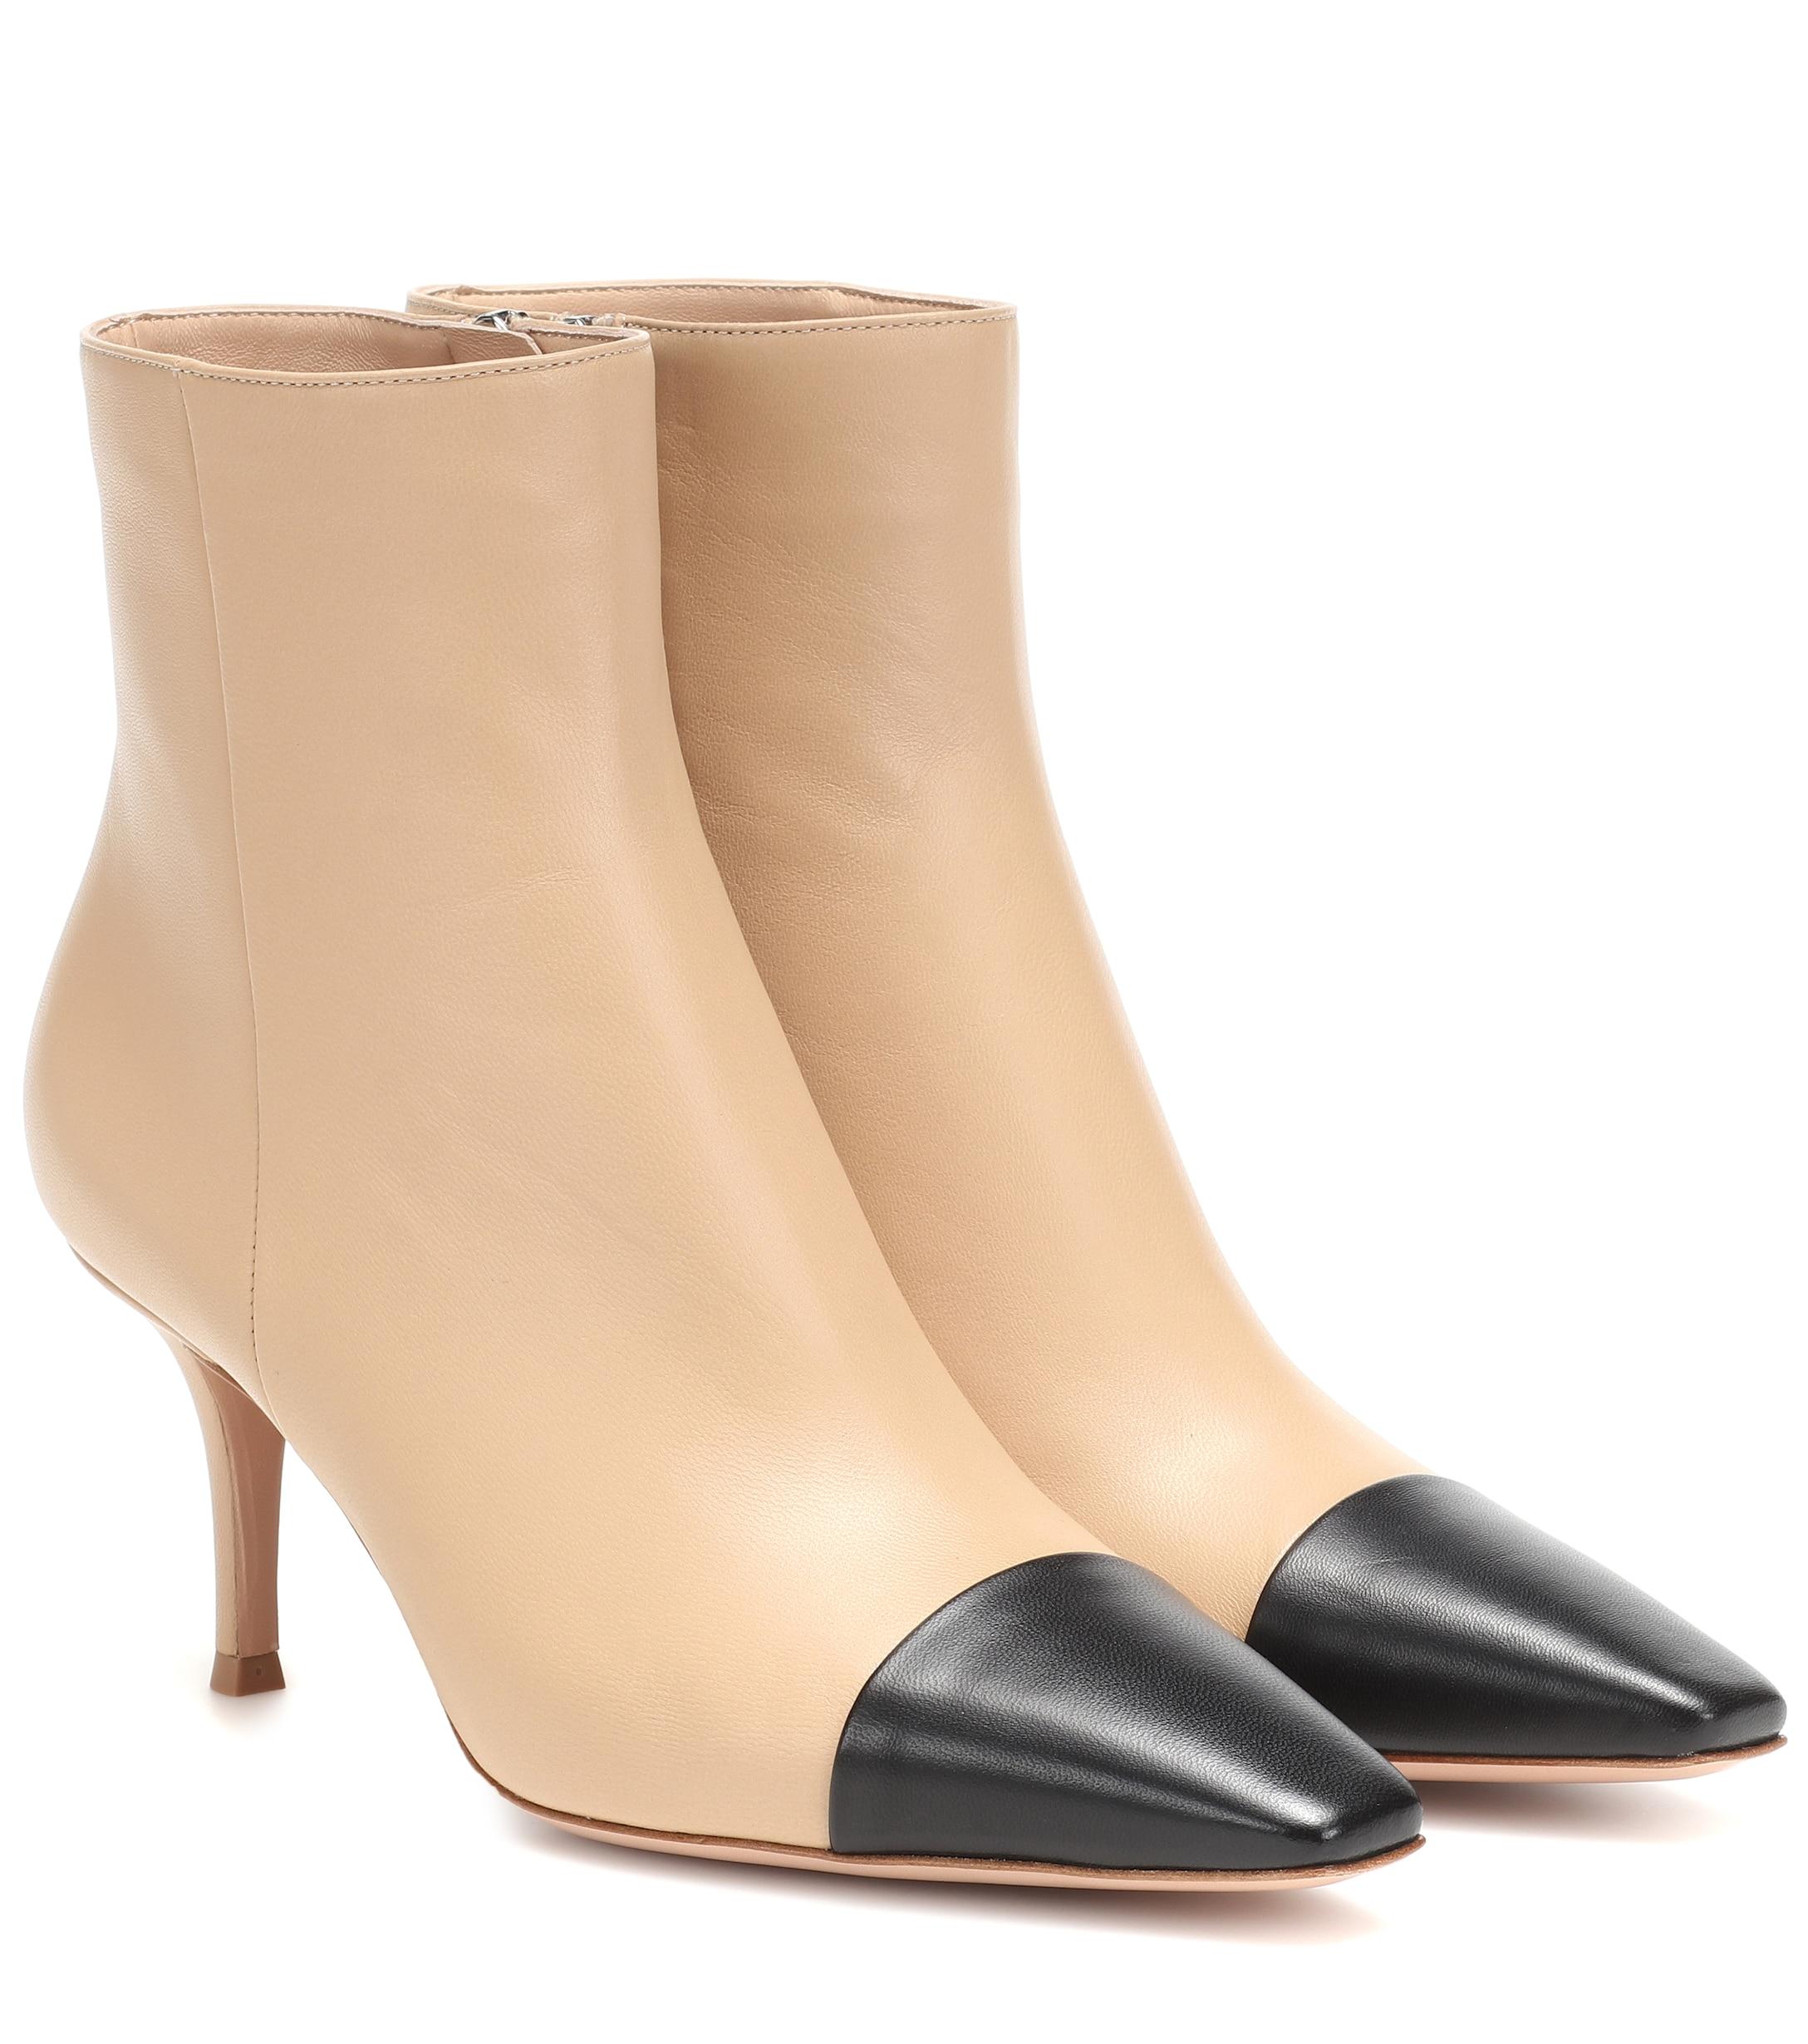 Gianvito Rossi Ankle Boots Beige Lucy Bootie in Natural | Lyst